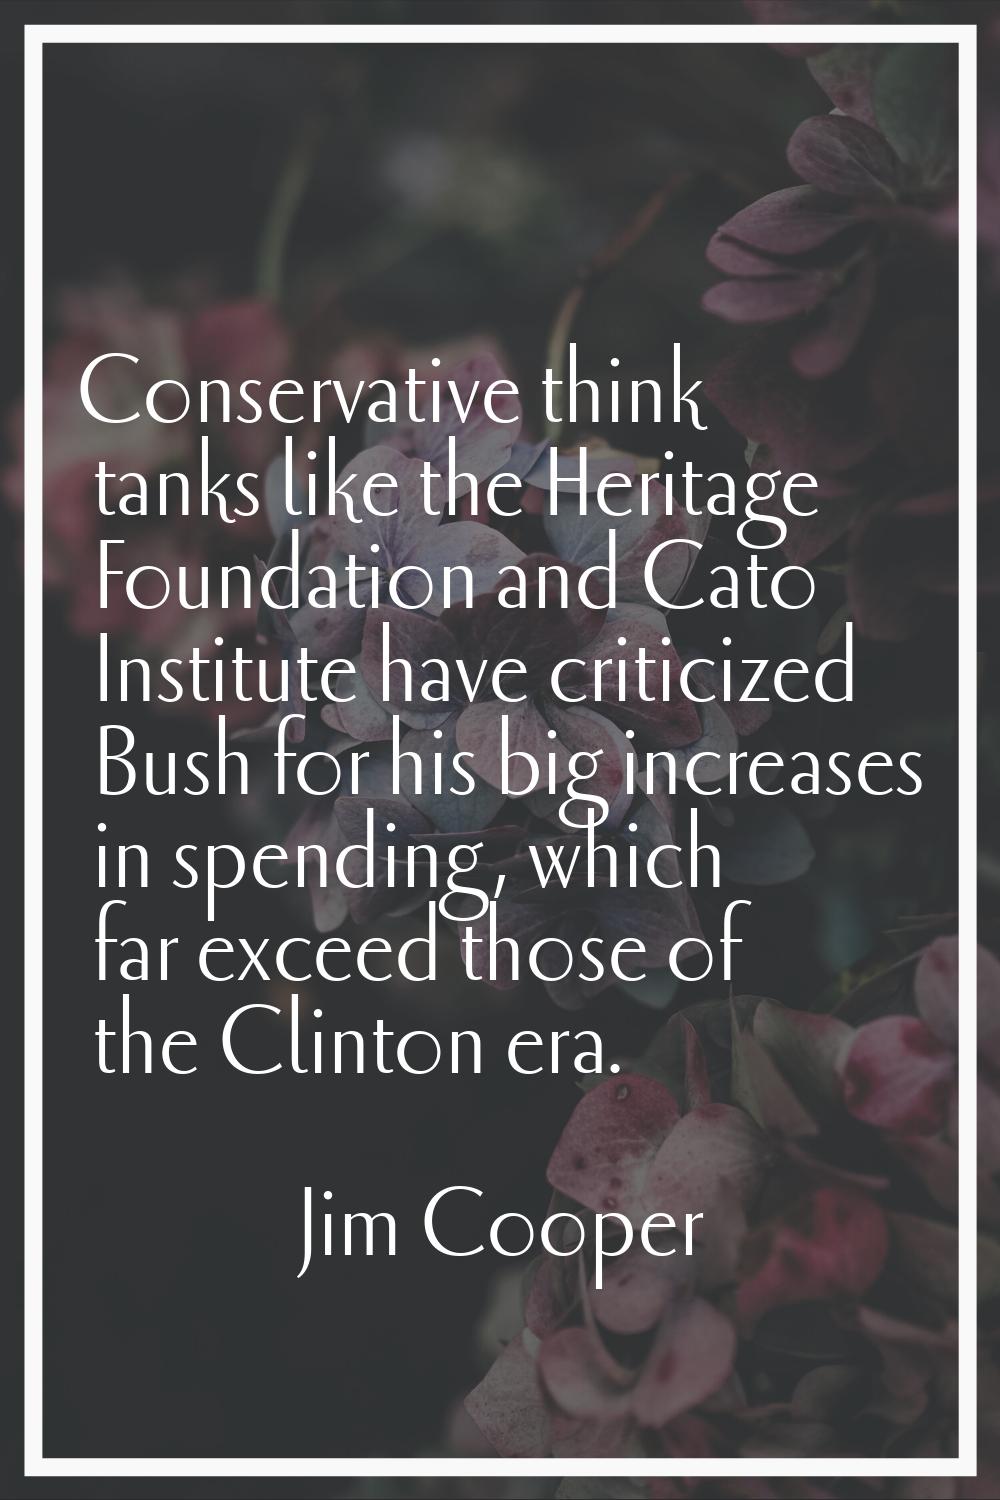 Conservative think tanks like the Heritage Foundation and Cato Institute have criticized Bush for h